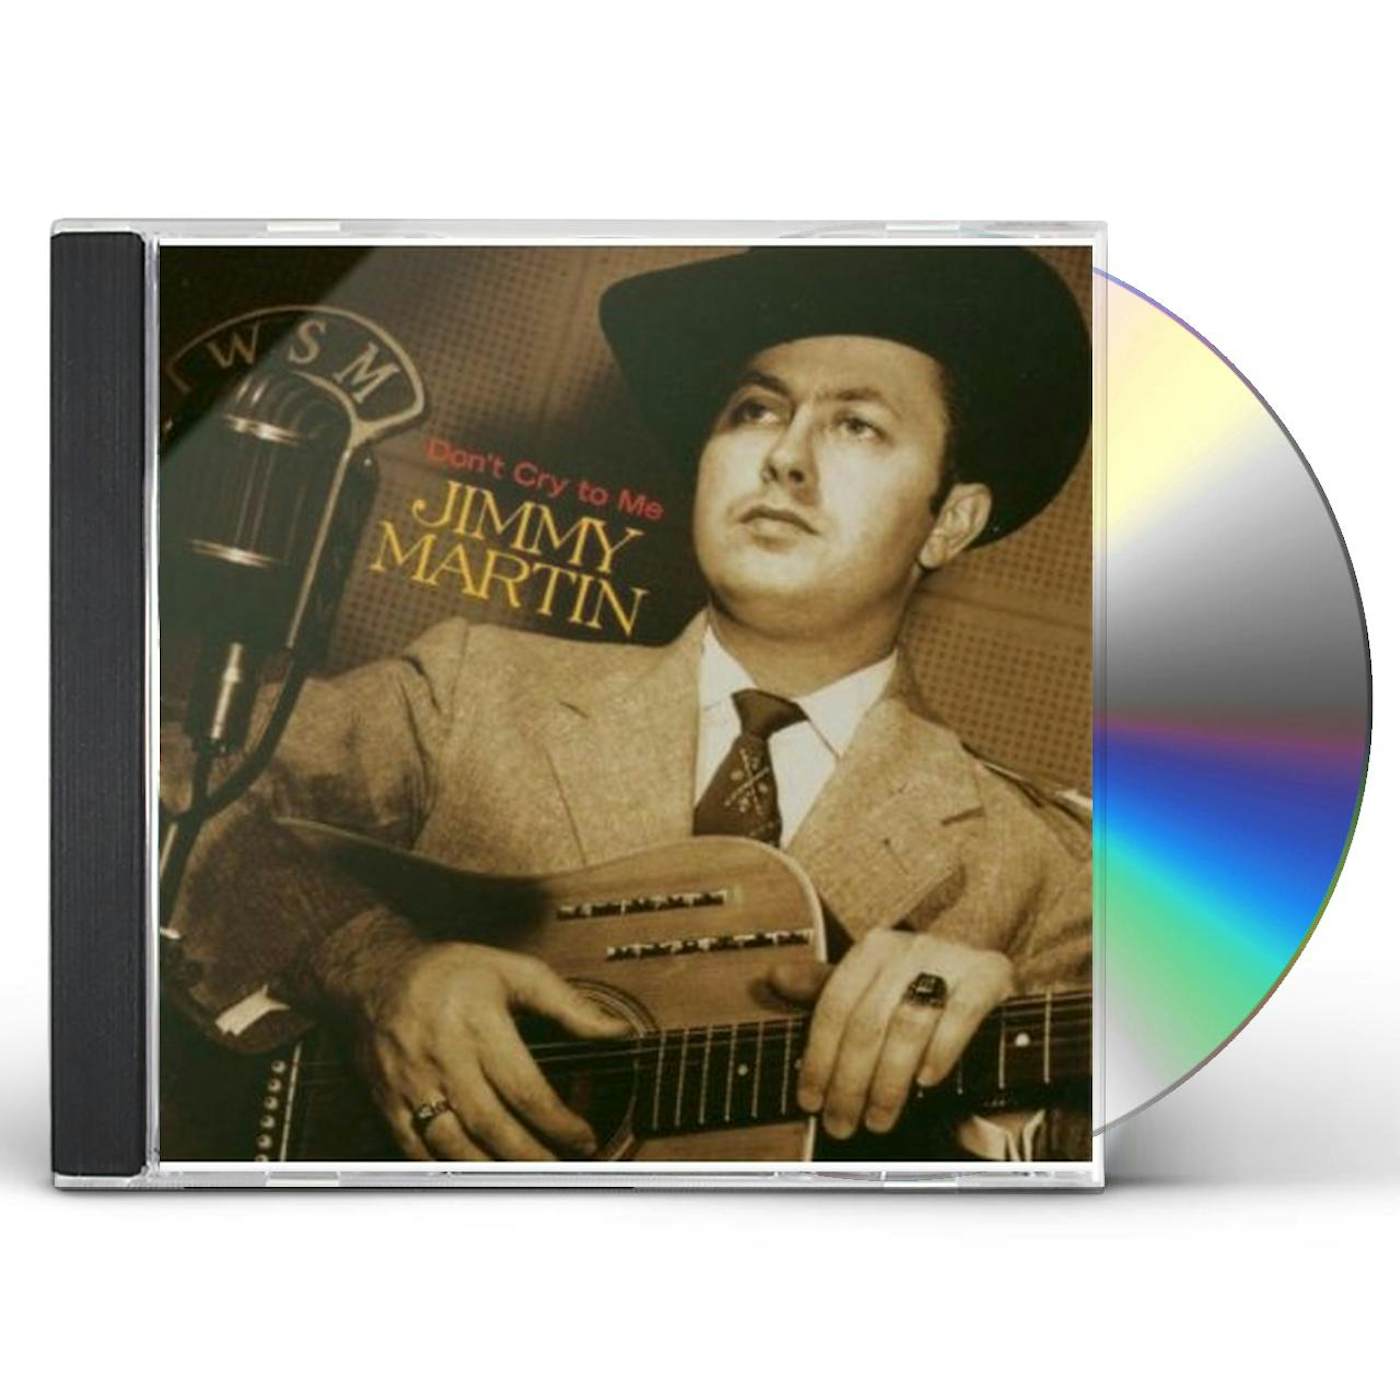 Jimmy Martin DON'T CRY TO ME CD